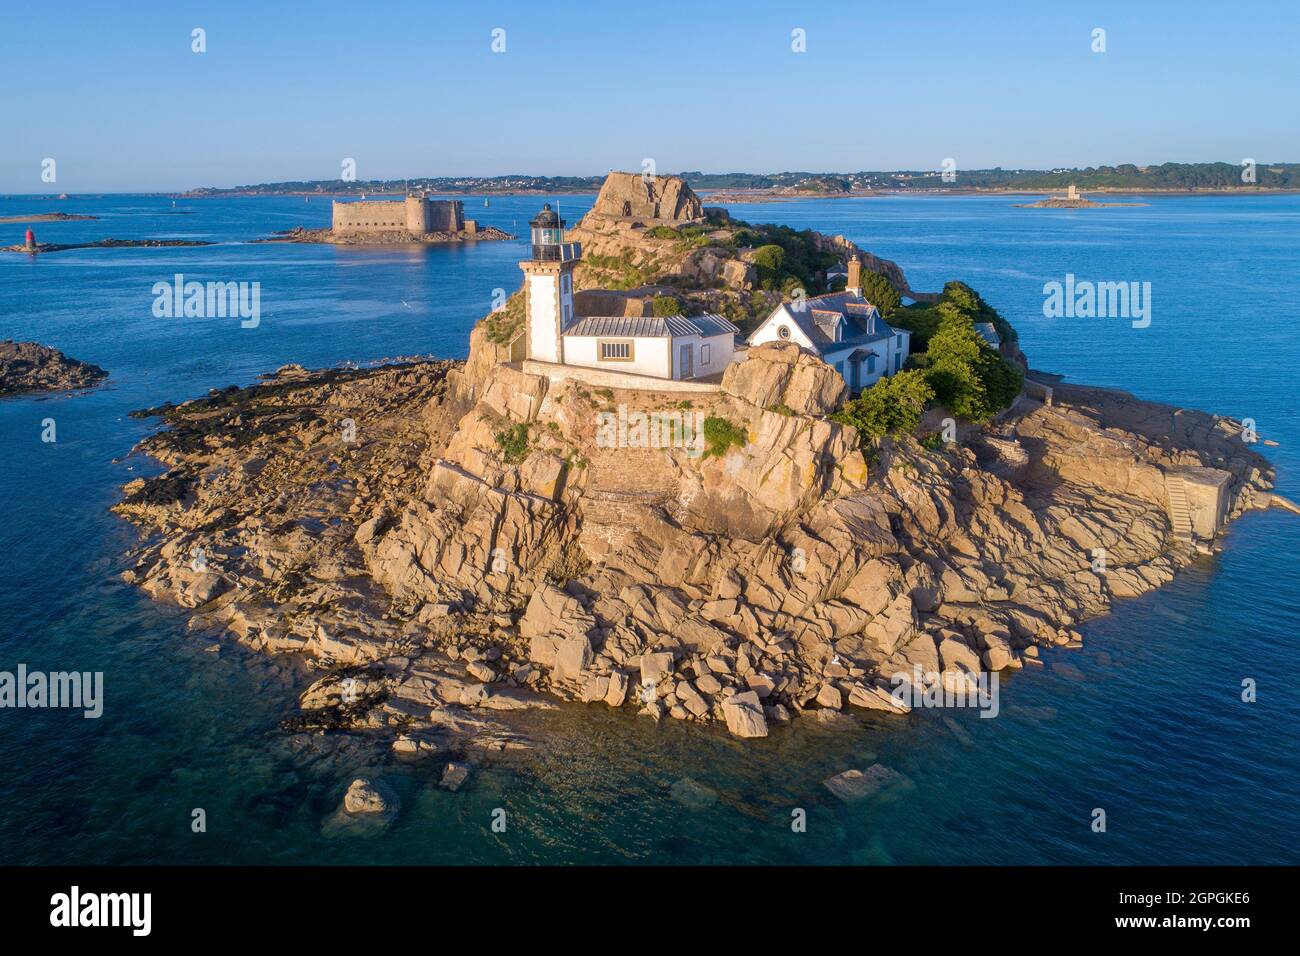 France, Finistere, Morlaix bay, Carantec, Louet island and Taureau castle built by Vauban in the 17th century (aerial view) Stock Photo